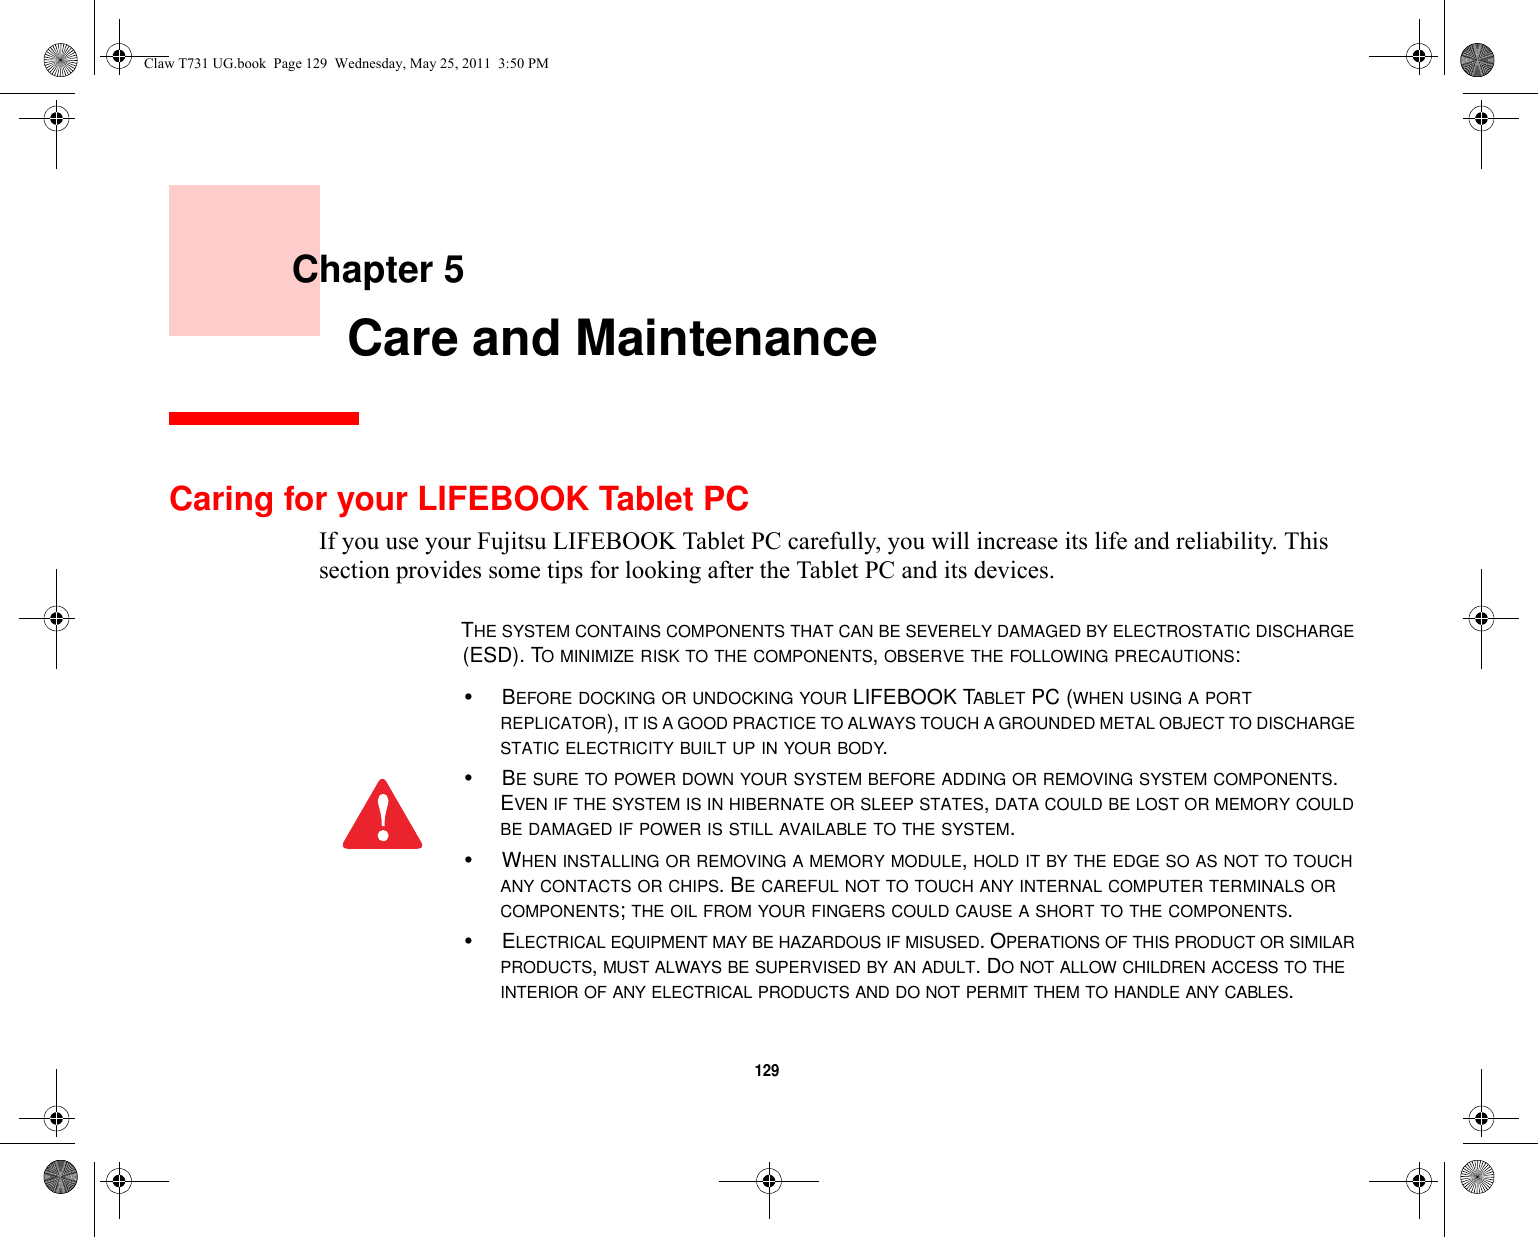 129     Chapter 5    Care and MaintenanceCaring for your LIFEBOOK Tablet PCIf you use your Fujitsu LIFEBOOK Tablet PC carefully, you will increase its life and reliability. This section provides some tips for looking after the Tablet PC and its devices.THE SYSTEM CONTAINS COMPONENTS THAT CAN BE SEVERELY DAMAGED BY ELECTROSTATIC DISCHARGE (ESD). TO MINIMIZE RISK TO THE COMPONENTS, OBSERVE THE FOLLOWING PRECAUTIONS:•BEFORE DOCKING OR UNDOCKING YOUR LIFEBOOK TABLET PC (WHEN USING A PORT REPLICATOR), IT IS A GOOD PRACTICE TO ALWAYS TOUCH A GROUNDED METAL OBJECT TO DISCHARGE STATIC ELECTRICITY BUILT UP IN YOUR BODY. •BE SURE TO POWER DOWN YOUR SYSTEM BEFORE ADDING OR REMOVING SYSTEM COMPONENTS. EVEN IF THE SYSTEM IS IN HIBERNATE OR SLEEP STATES, DATA COULD BE LOST OR MEMORY COULD BE DAMAGED IF POWER IS STILL AVAILABLE TO THE SYSTEM.•WHEN INSTALLING OR REMOVING A MEMORY MODULE, HOLD IT BY THE EDGE SO AS NOT TO TOUCH ANY CONTACTS OR CHIPS. BE CAREFUL NOT TO TOUCH ANY INTERNAL COMPUTER TERMINALS OR COMPONENTS; THE OIL FROM YOUR FINGERS COULD CAUSE A SHORT TO THE COMPONENTS. •ELECTRICAL EQUIPMENT MAY BE HAZARDOUS IF MISUSED. OPERATIONS OF THIS PRODUCT OR SIMILAR PRODUCTS, MUST ALWAYS BE SUPERVISED BY AN ADULT. DO NOT ALLOW CHILDREN ACCESS TO THE INTERIOR OF ANY ELECTRICAL PRODUCTS AND DO NOT PERMIT THEM TO HANDLE ANY CABLES.Claw T731 UG.book  Page 129  Wednesday, May 25, 2011  3:50 PM